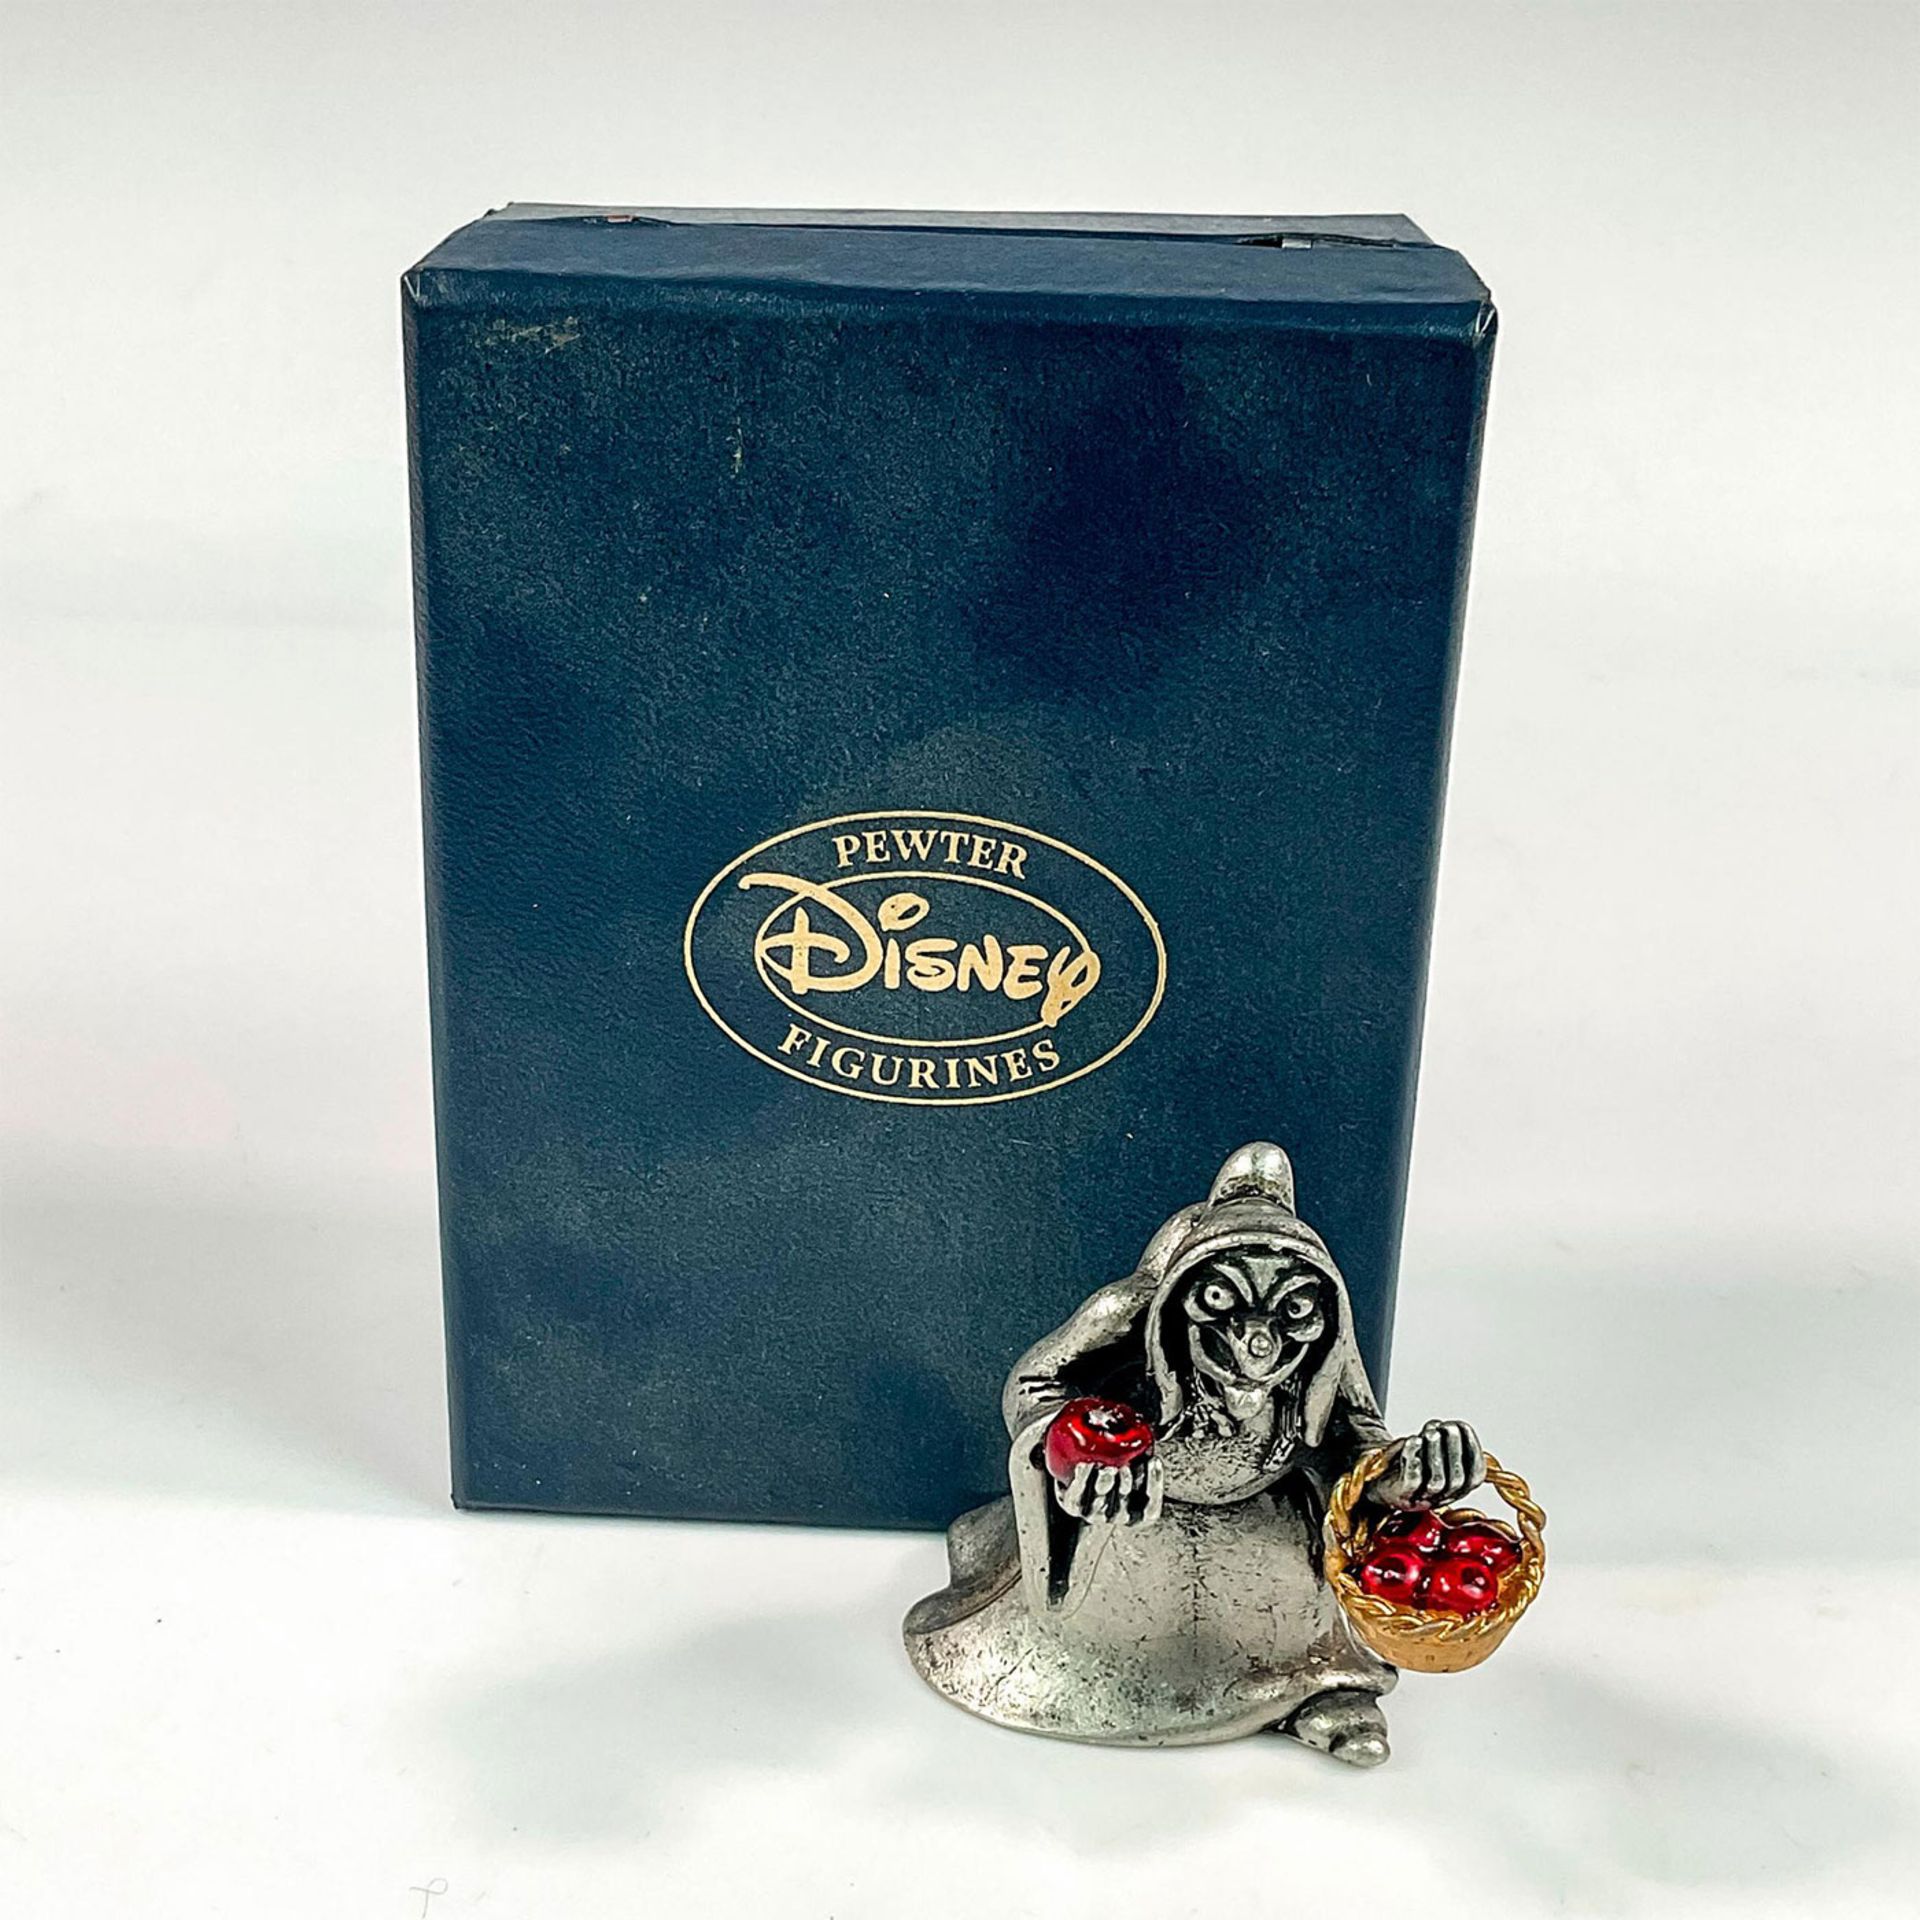 Pewter Disney Figurine, The Evil Witch - Image 4 of 4